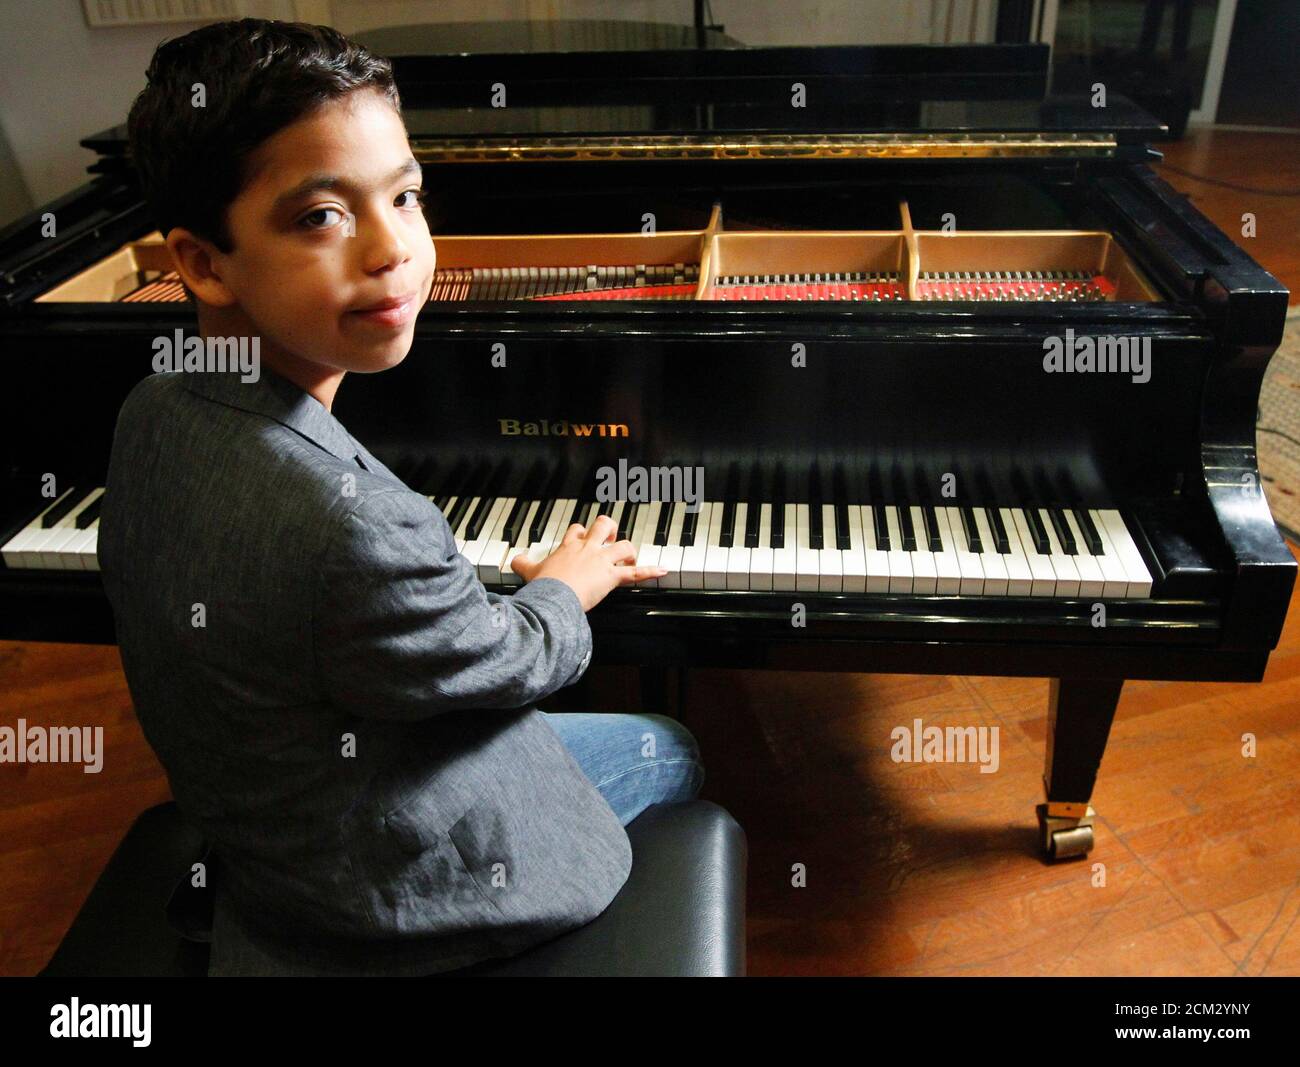 Eleven-year-old piano player, Ethan Bortnick, poses in a New York Studio,  July 25, 2012. Bortnick, was recognised as the youngest solo musician to  headline his own tour by the Guinness Book of